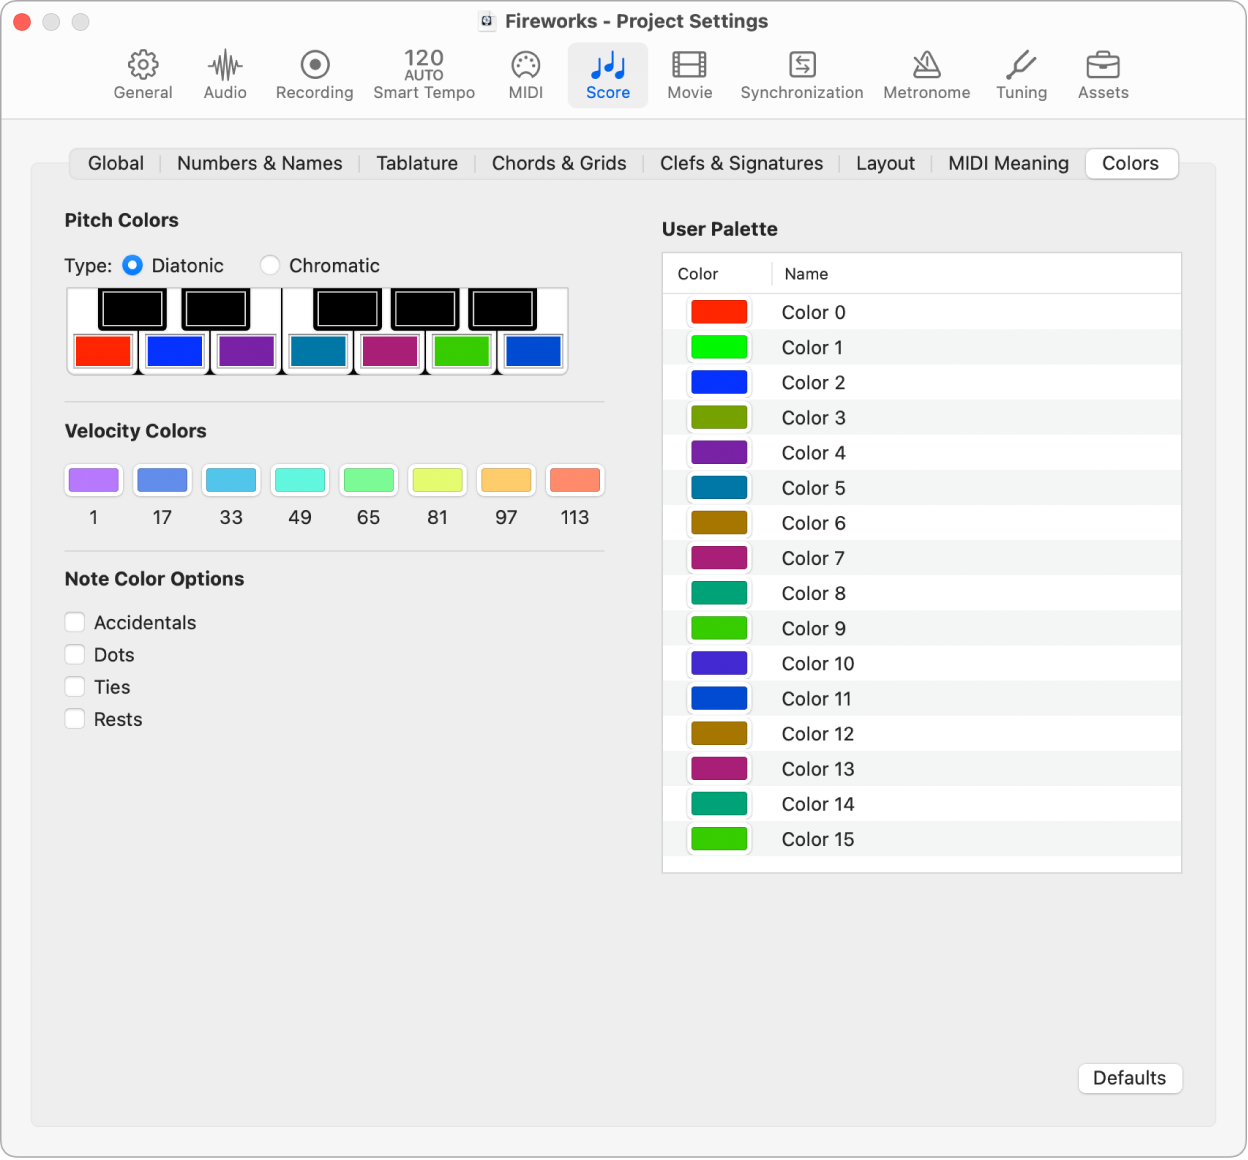 Color Settings –  Support